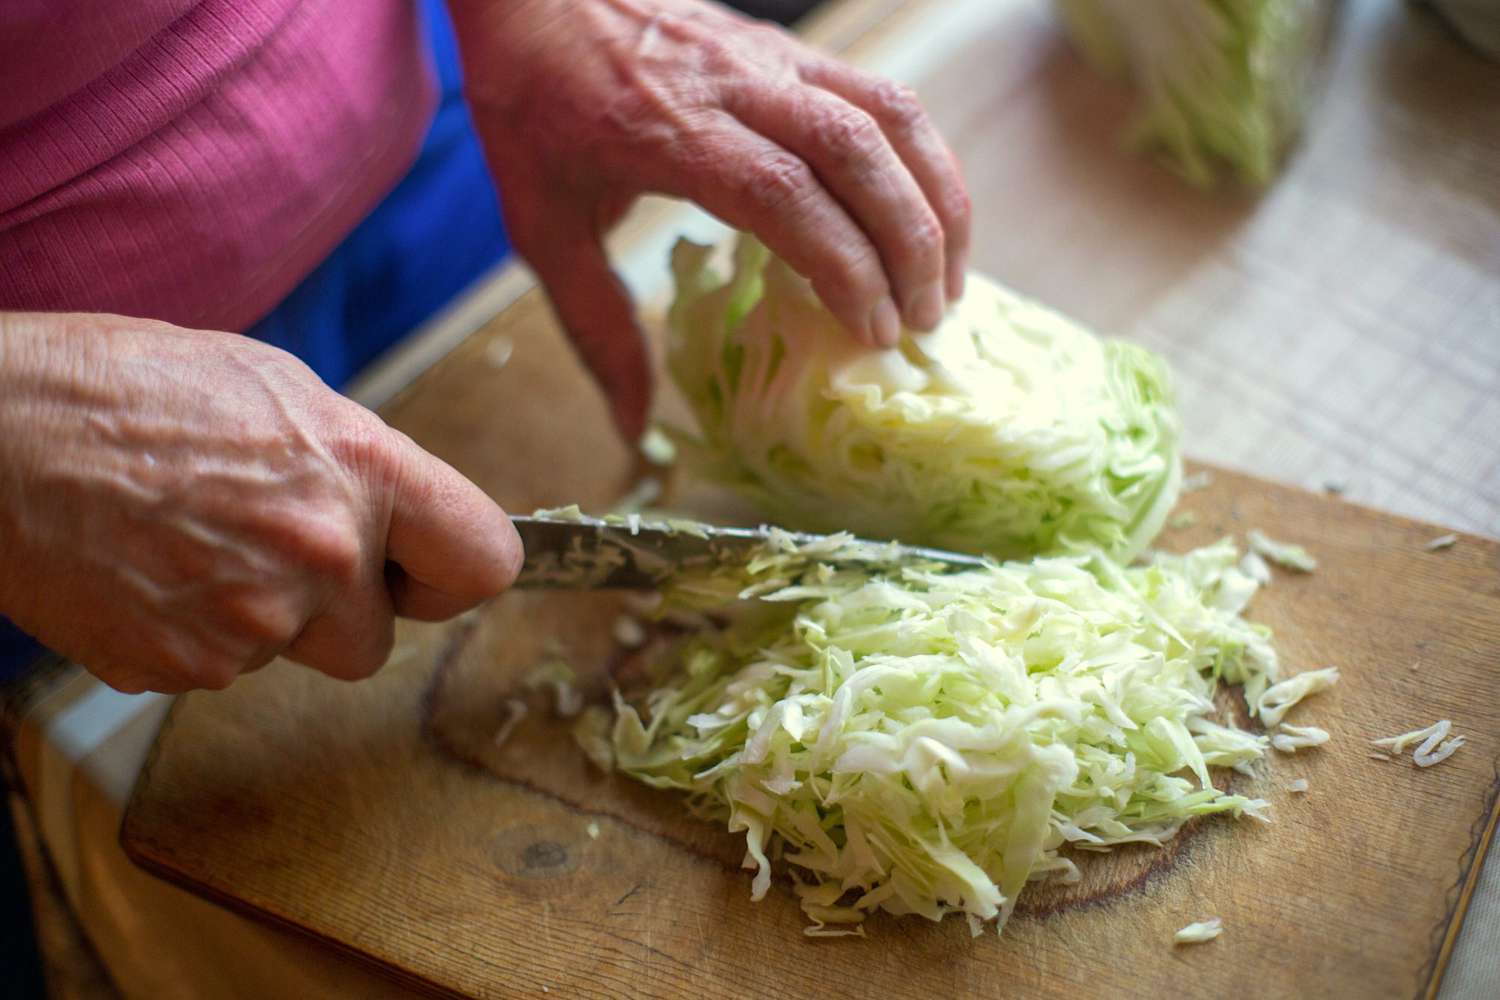 Knife Skills: How to Shred Cabbage for Coleslaw 